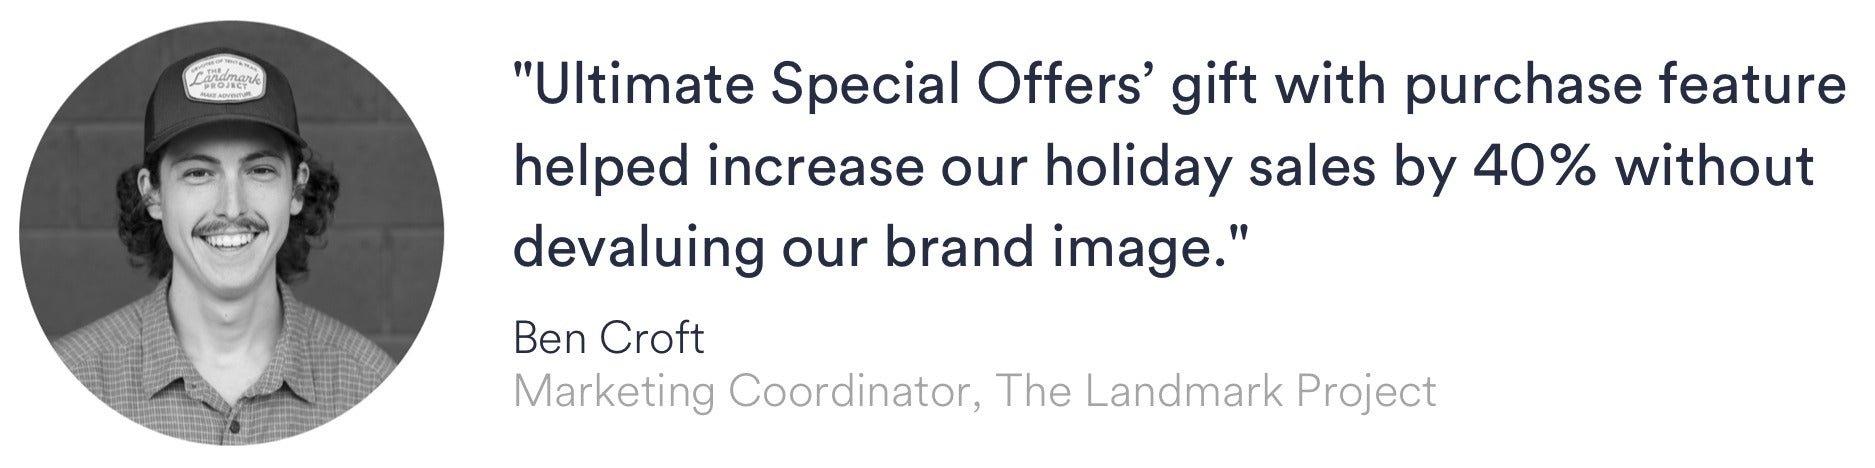 Quote from The Landmark Project on how Ultimate Special Offers helped increase their holiday revenue by 40 percent